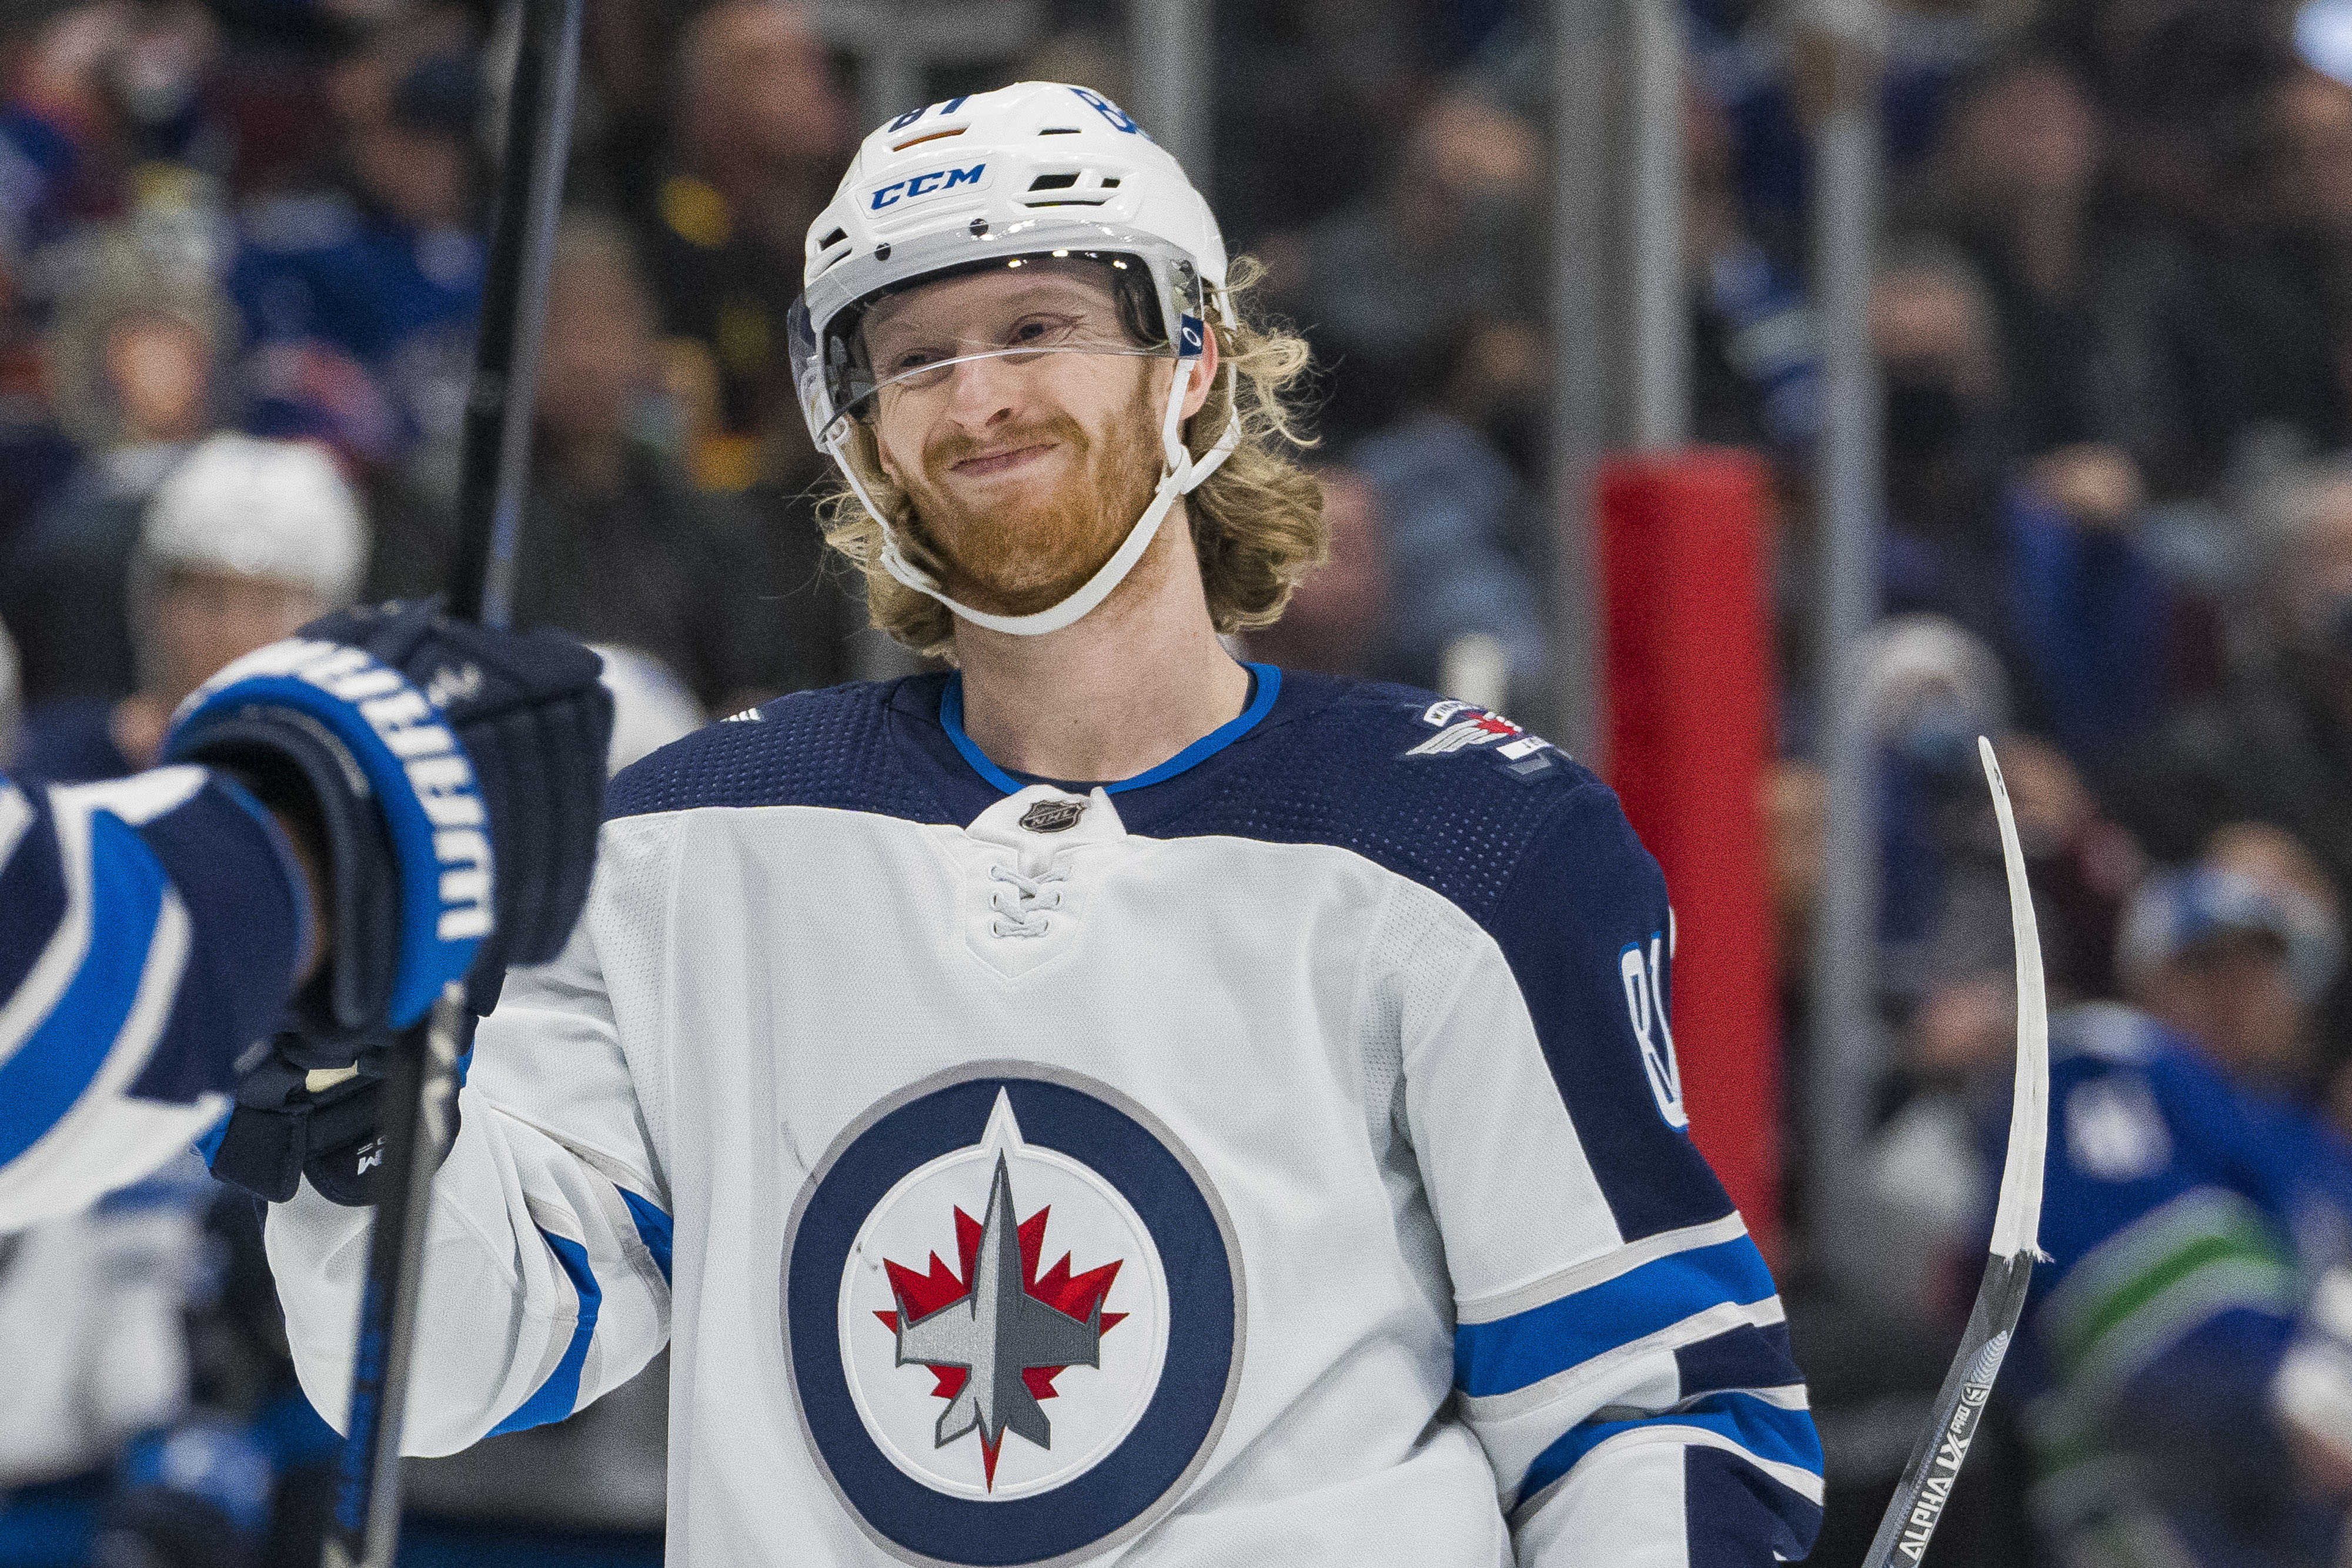 Dec 10, 2021; Vancouver, British Columbia, CAN; Winnipeg Jets forward Kyle Connor (81) celebrates a goal scored by forward Mark Scheifele (55) against the Vancouver Canucks in the second period at Rogers Arena.